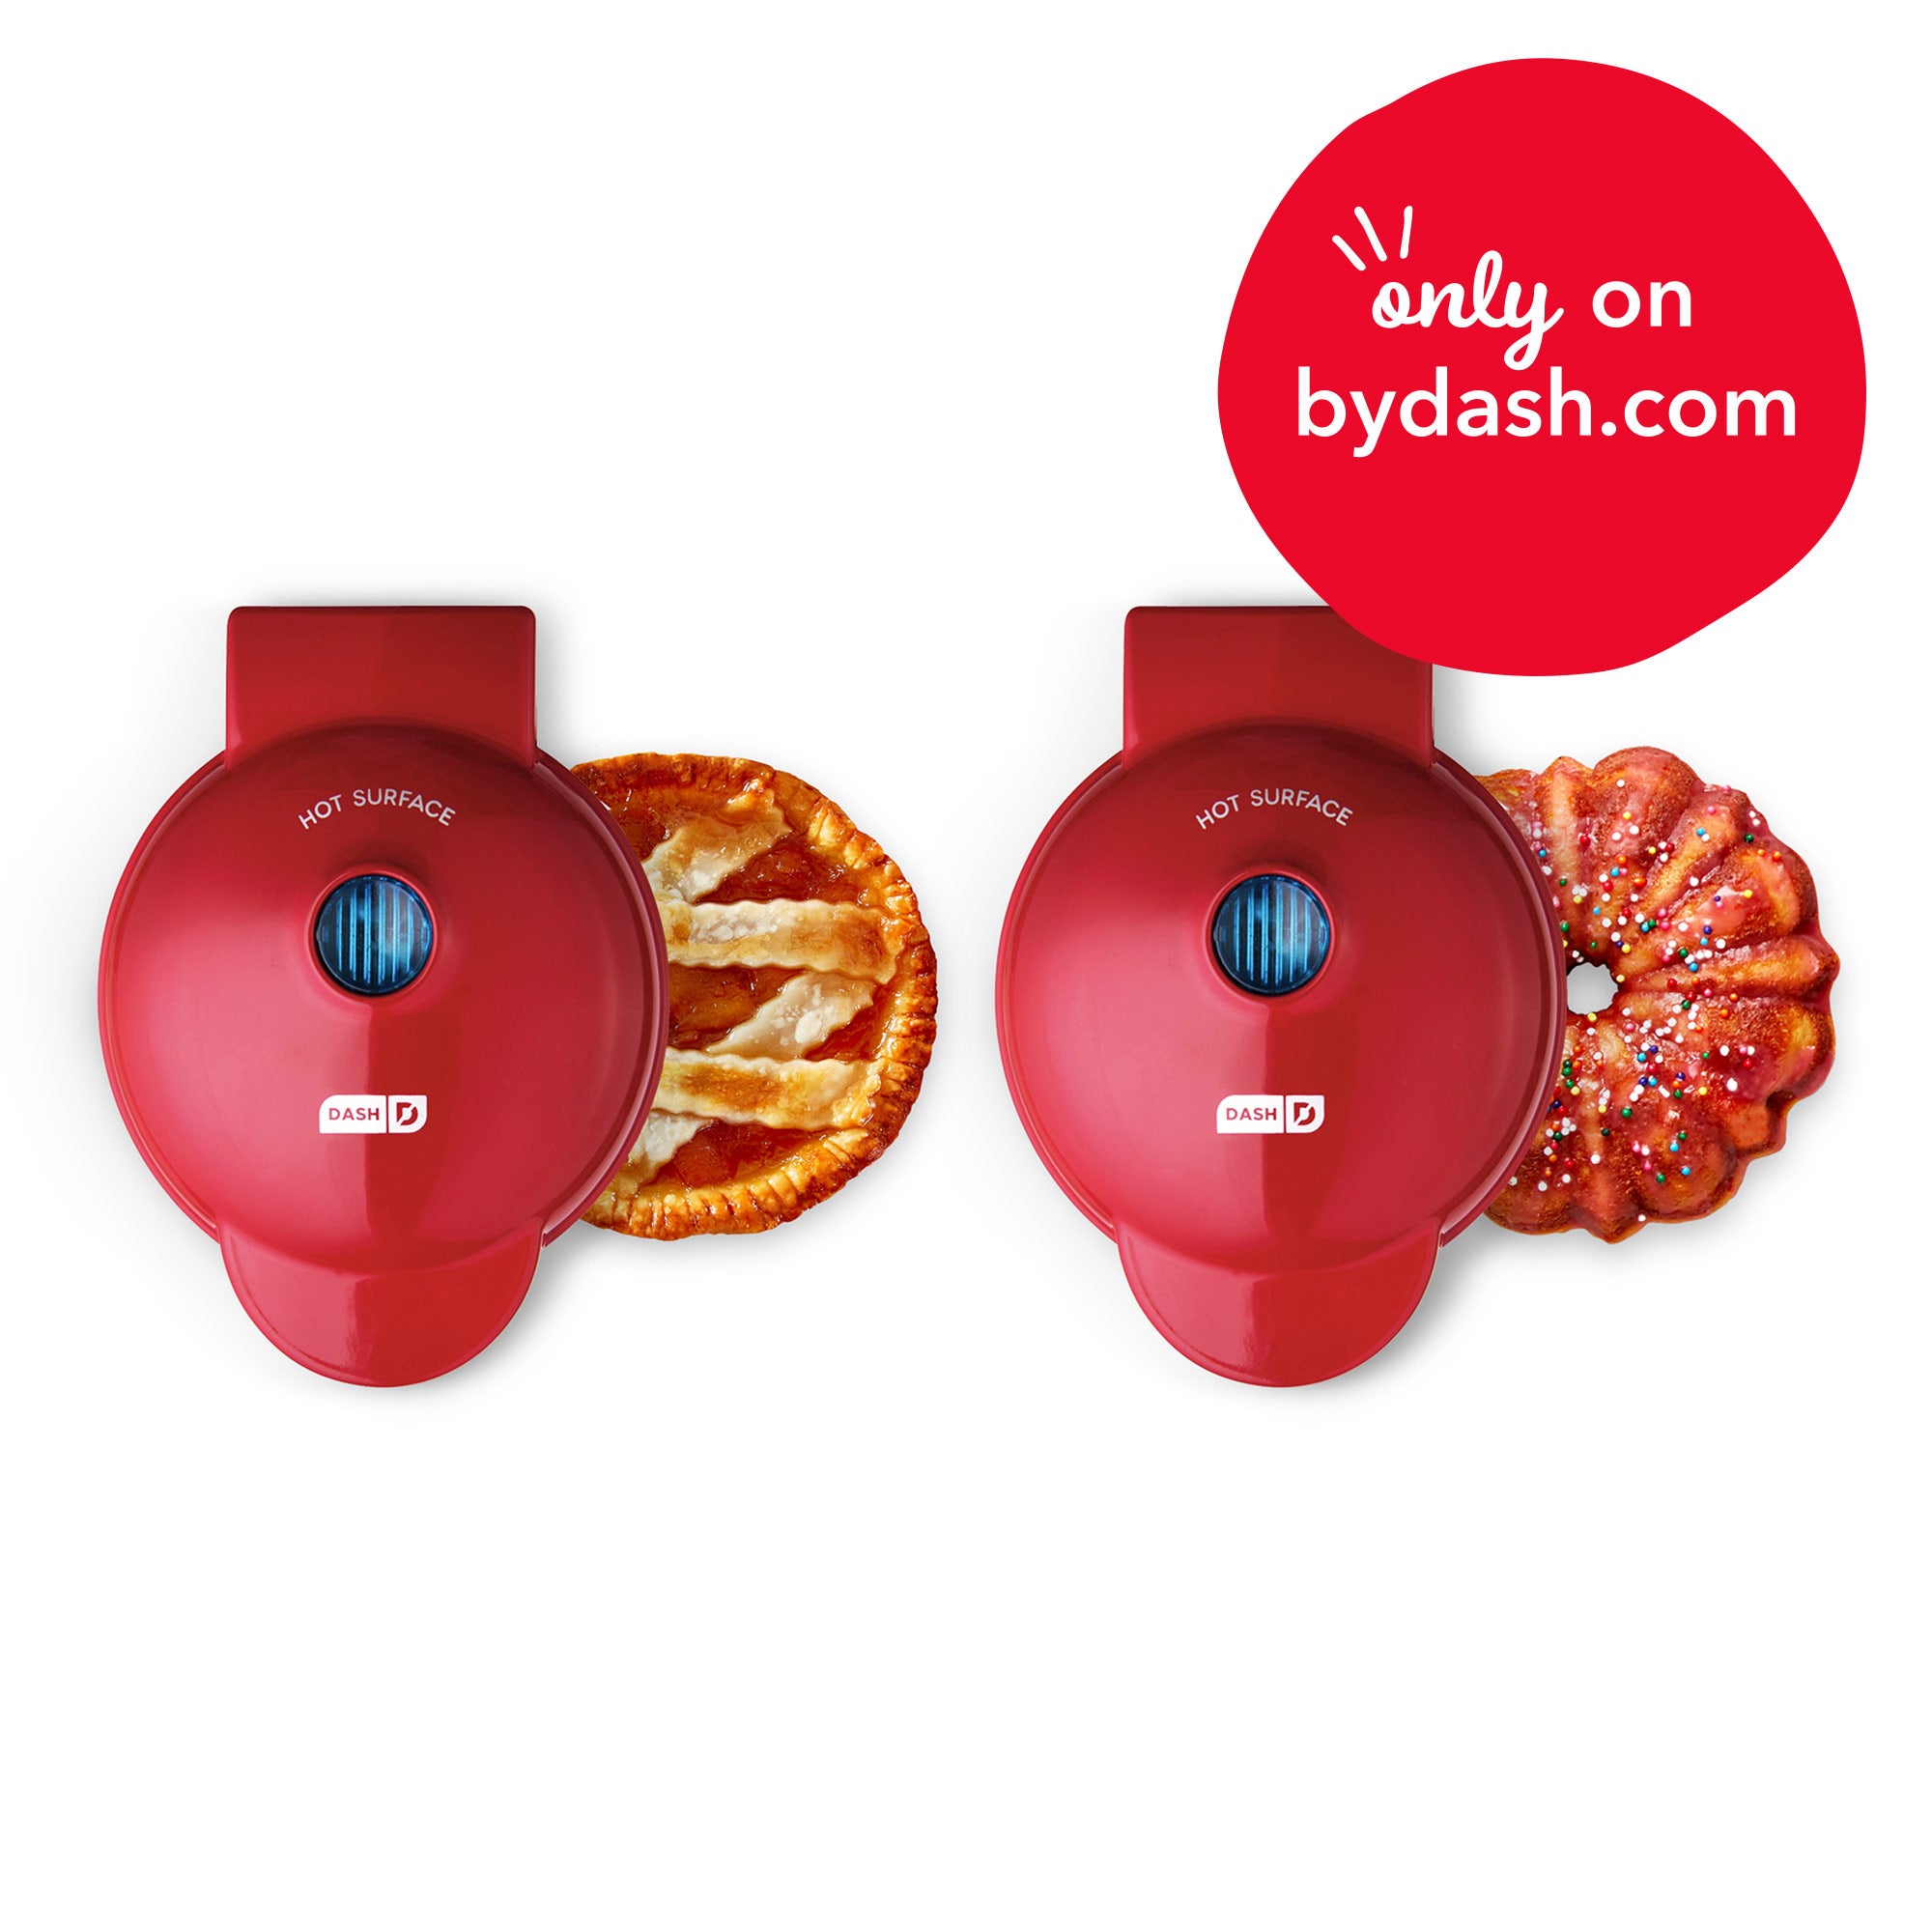 Dash Mini Pie Maker from Target! #holidayclearance #CouponWithQueenVee